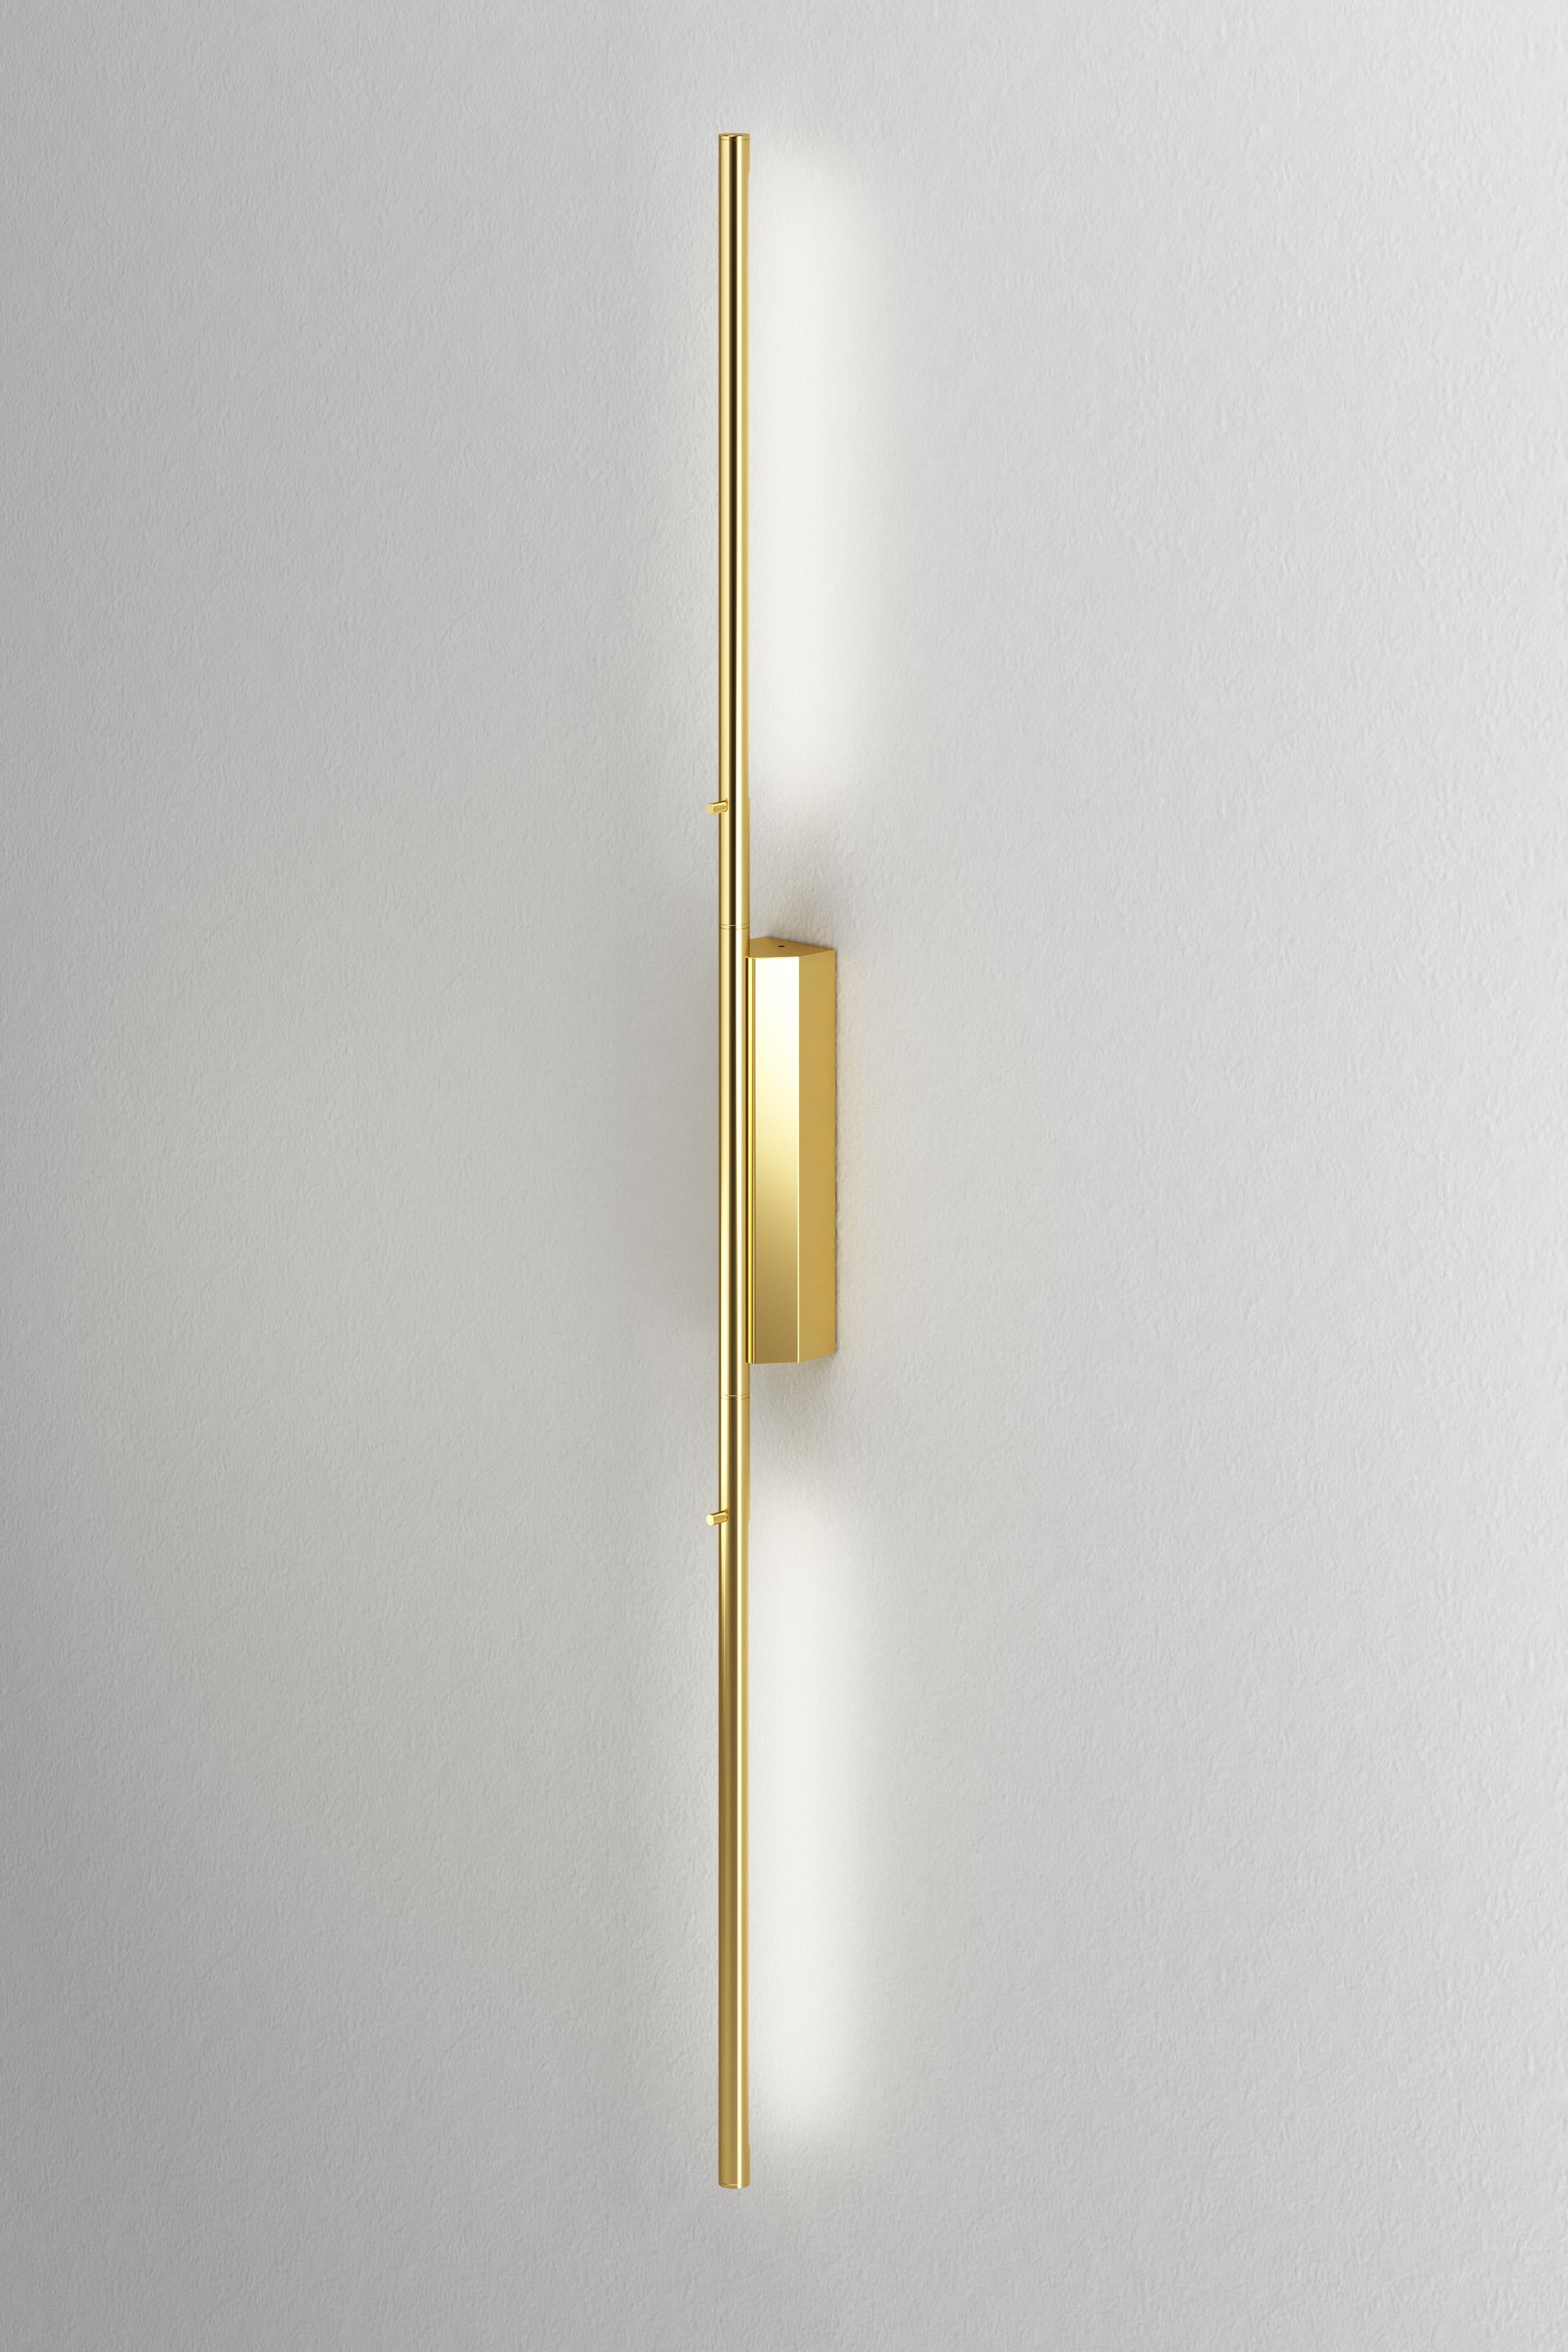 IP Link Double 1300 polished brass wall light by Emilie Cathelineau
Dimensions: D4.5 x W5 X H1300 cm
Materials: Solid brass, Polished Graphite, LED, Polycarbonate.
Others finishes and dimensions are available.

All our lamps can be wired